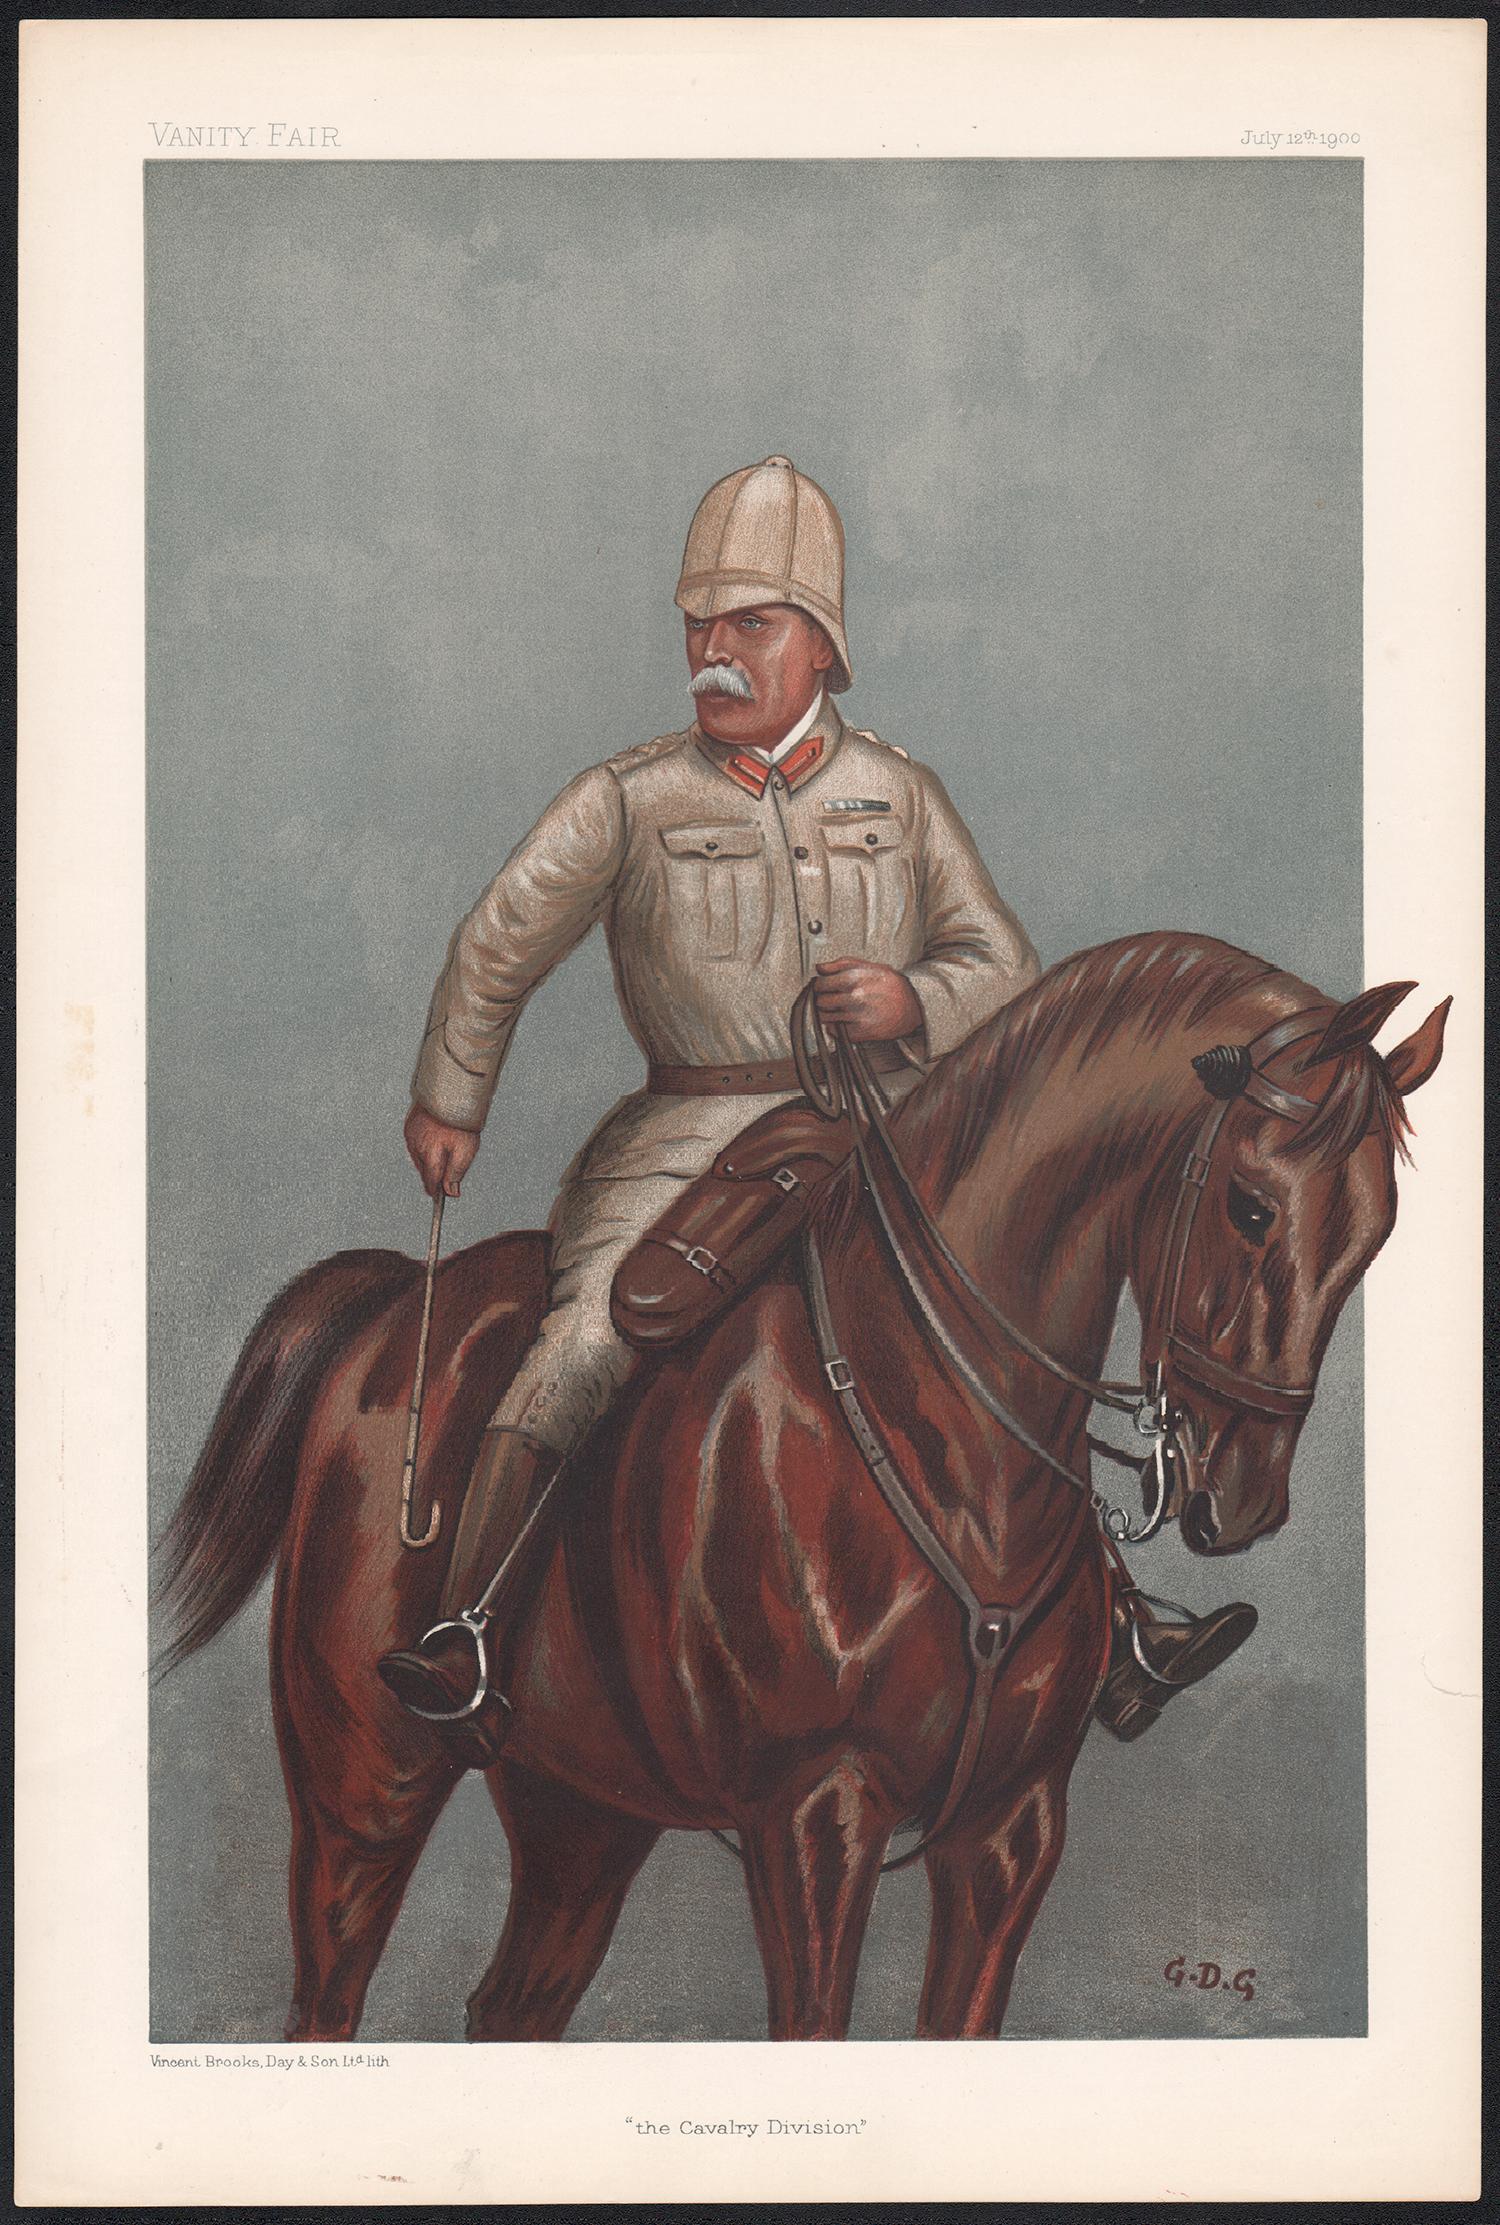 'the Cavalry Division', Vanity Fair military army horse chromolithograph, 1900 - Print by Godfrey Douglas Giles 